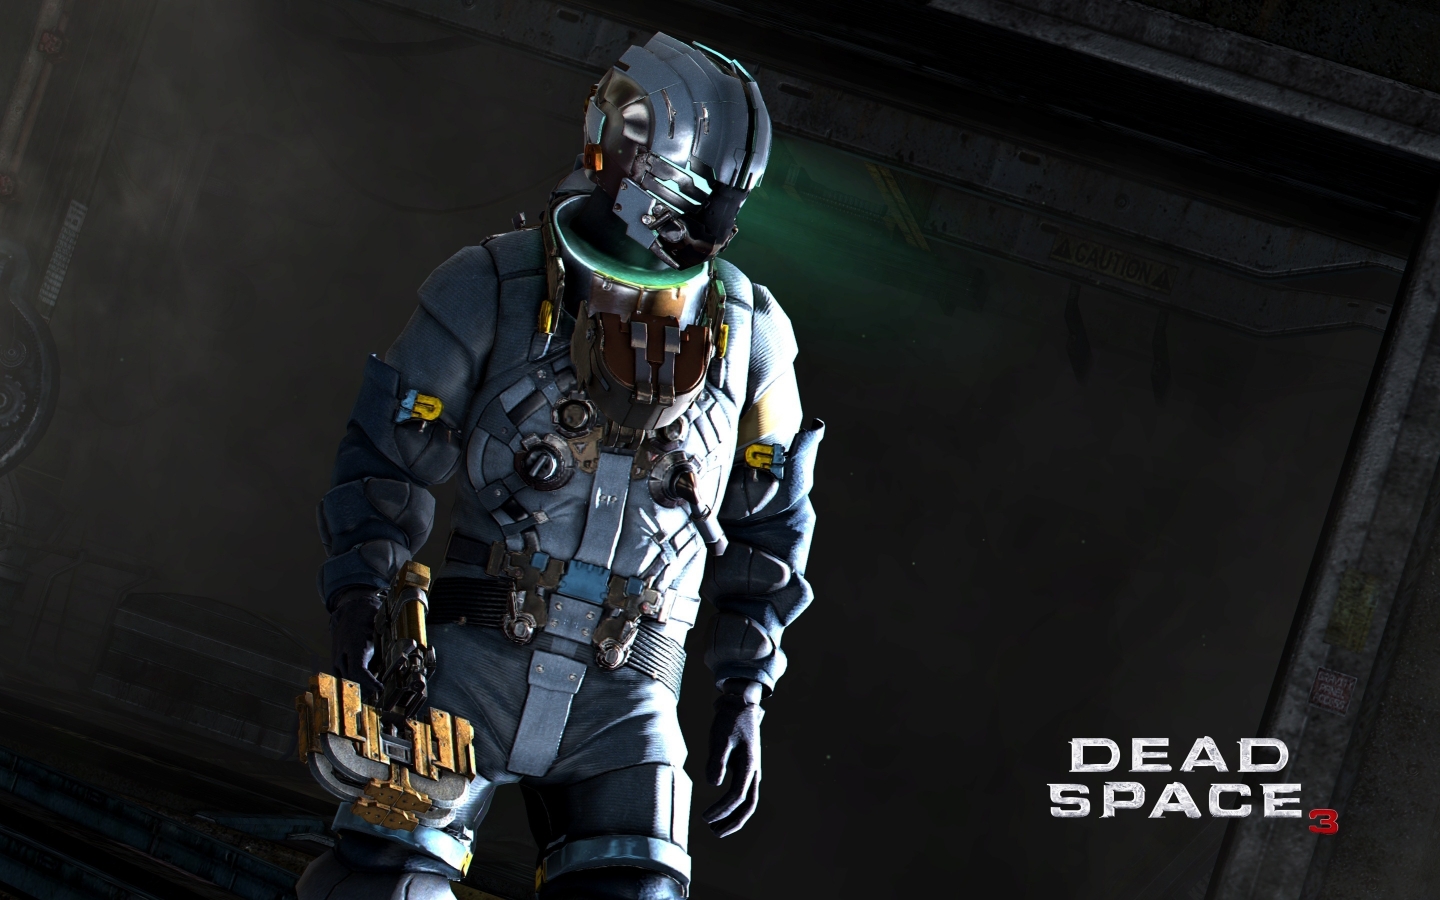 Dead Space 3 Costume for 1440 x 900 widescreen resolution